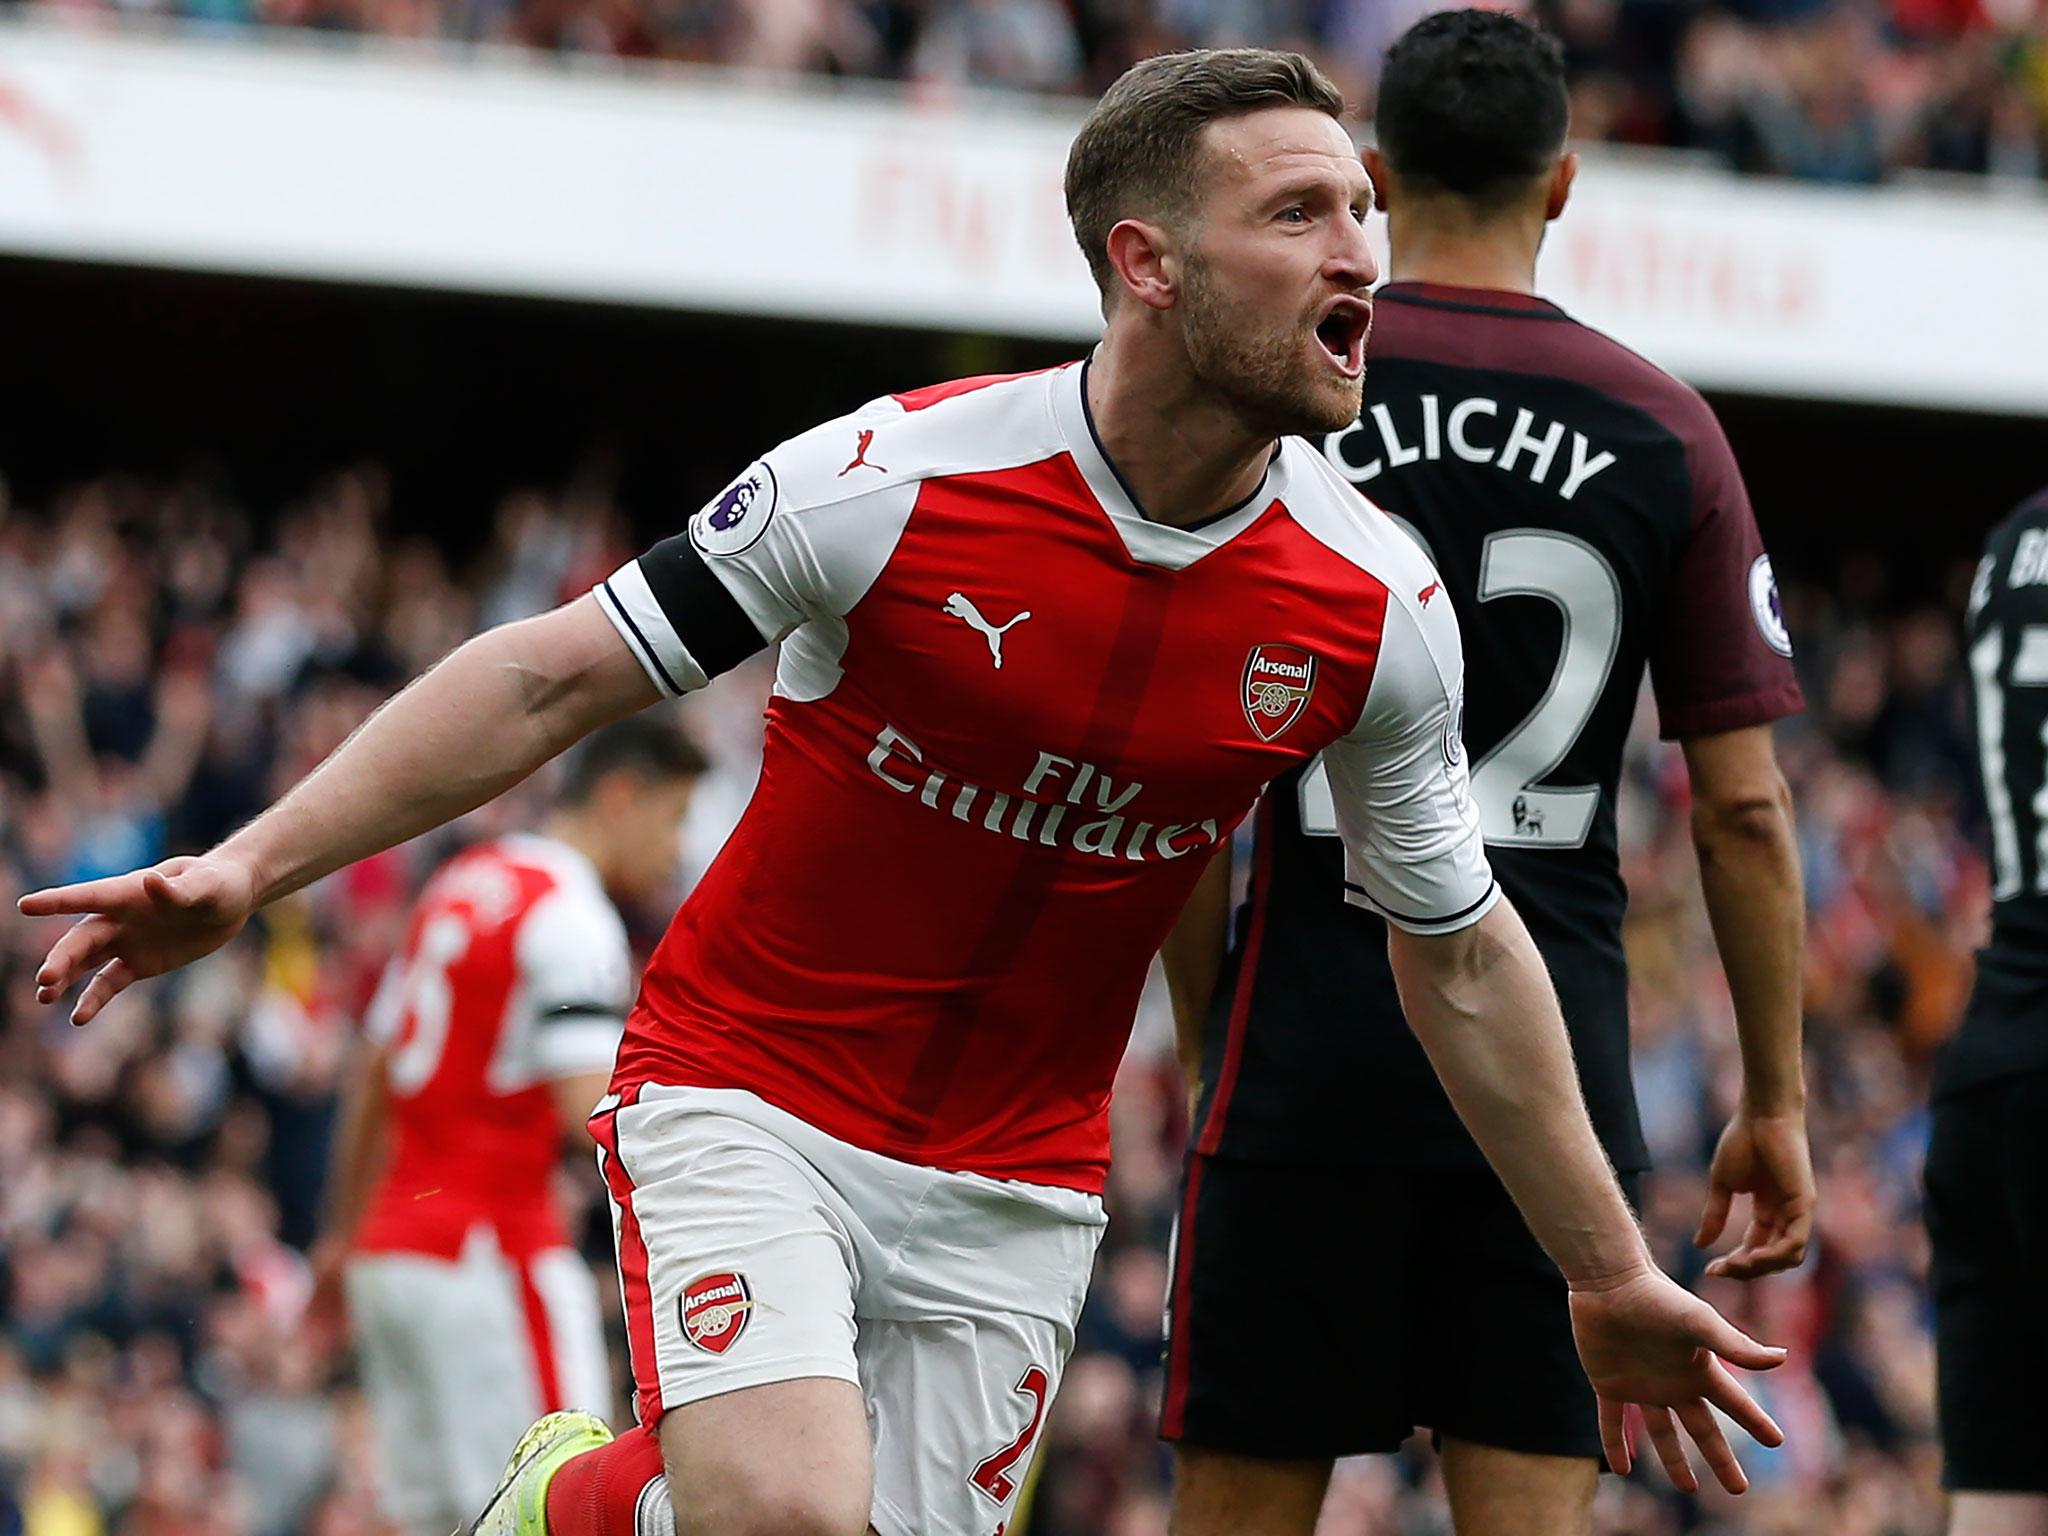 Shkodran Mustafi headed in a second-half equaliser to earn a share of the points at the Emirates